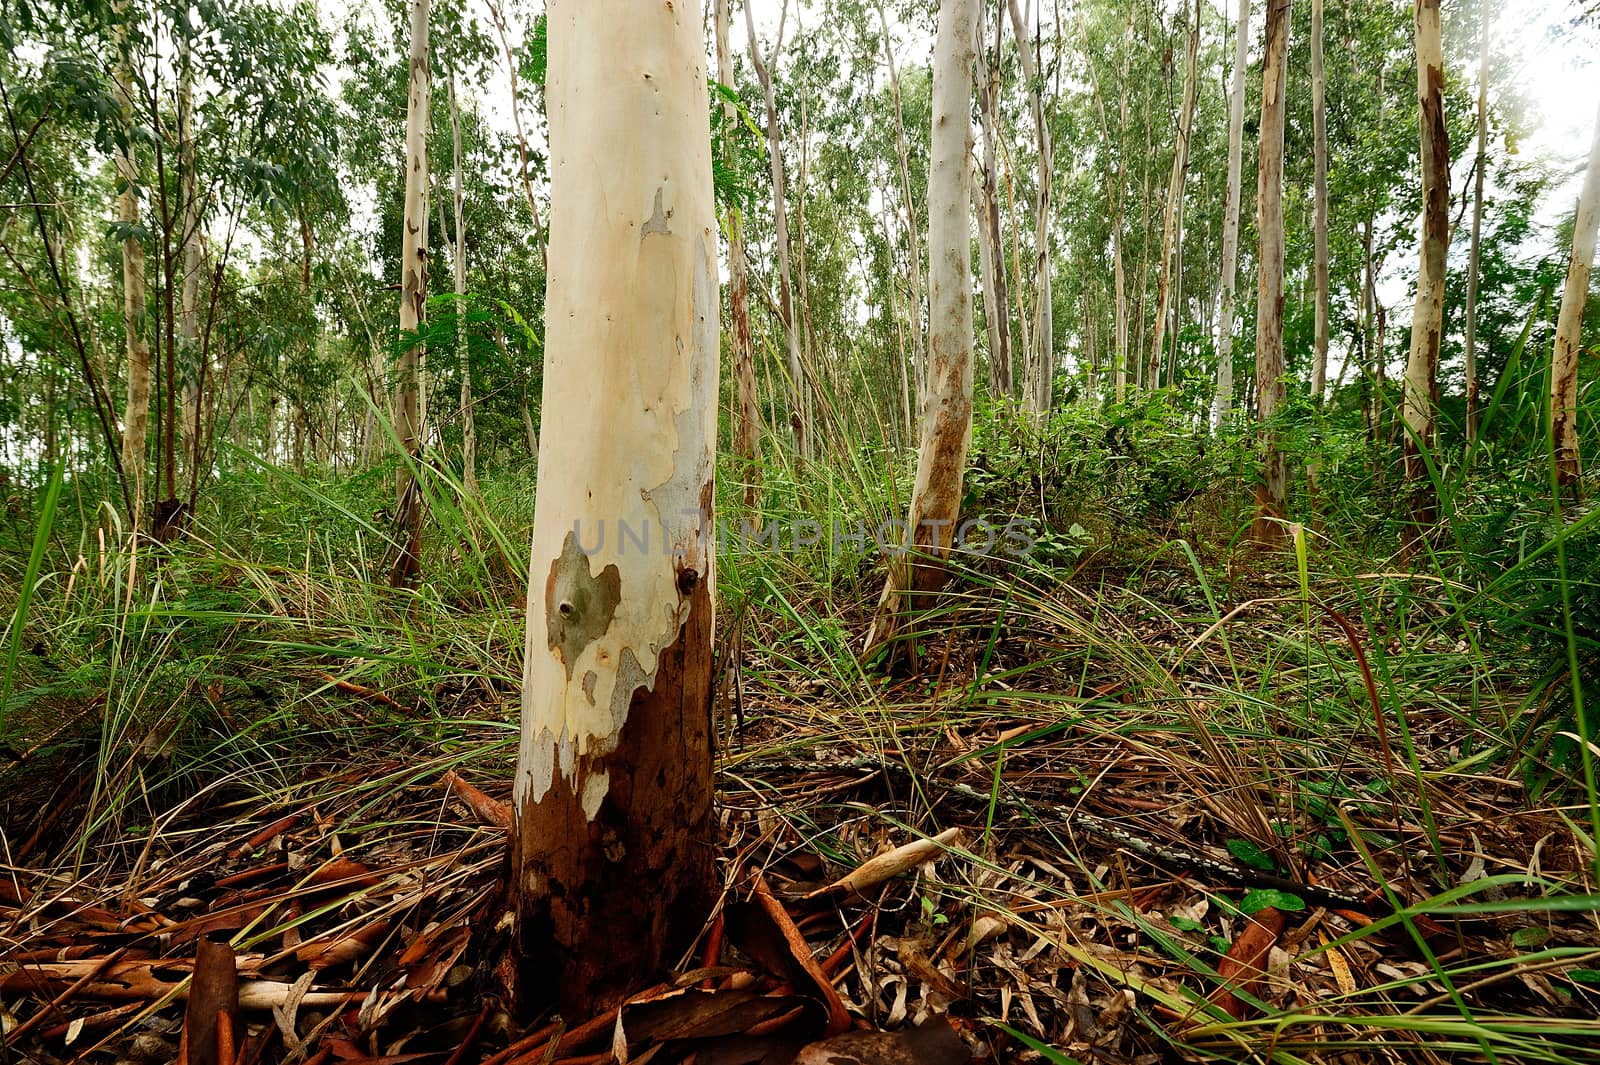 Plantation of Eucalyptus tree for paper industry